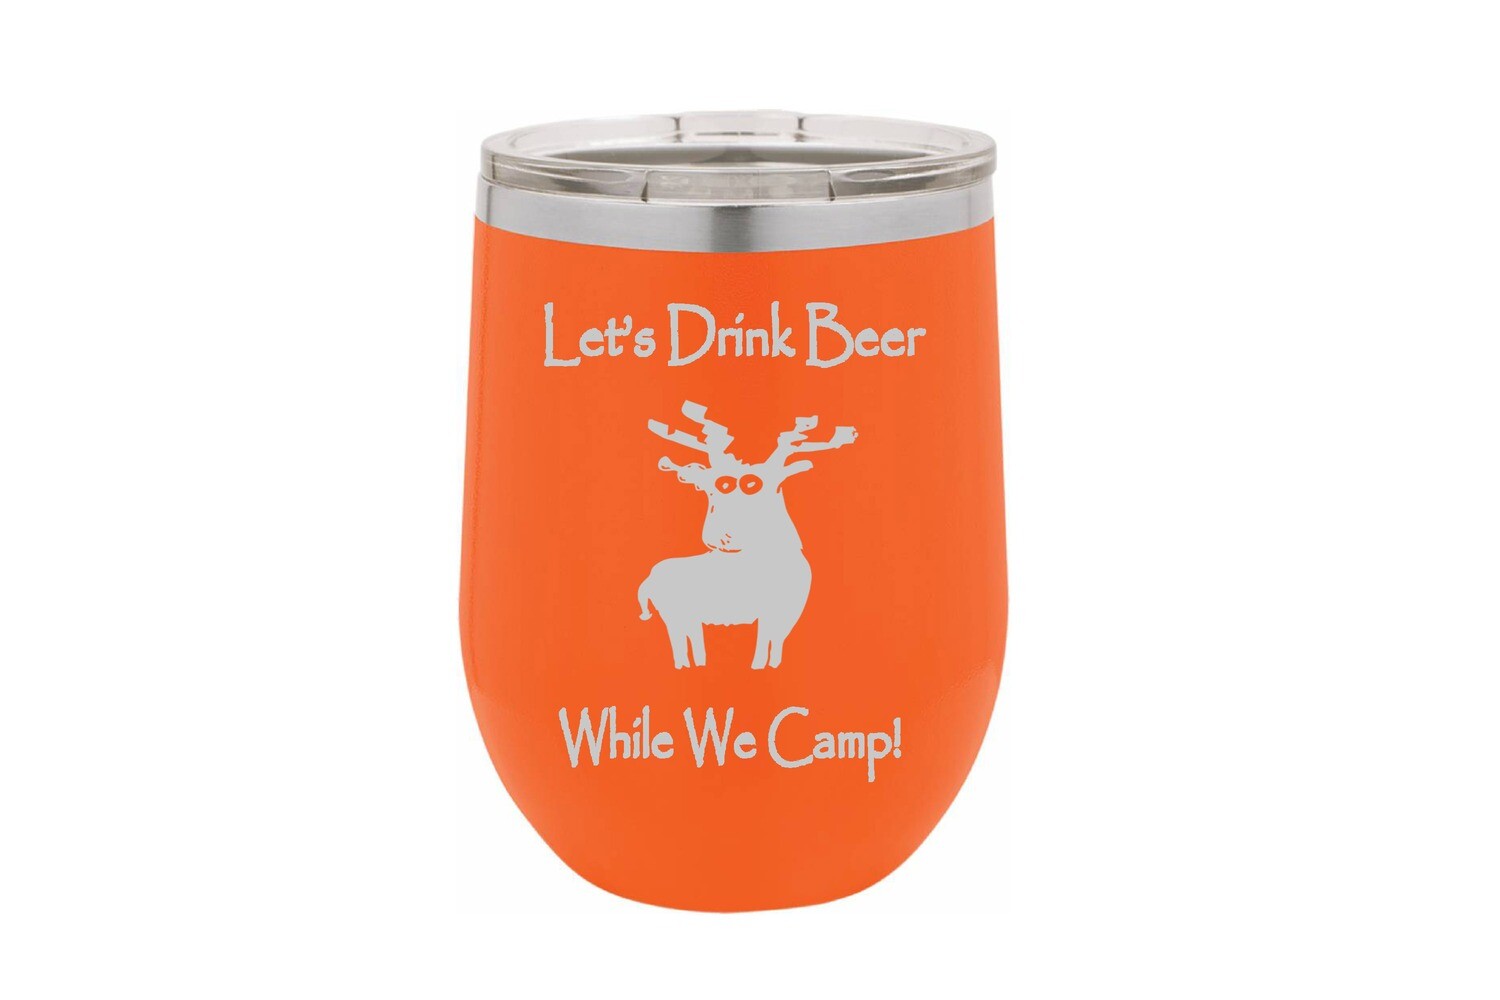 Let's drink beer while we camp Insulated Tumbler 12 oz